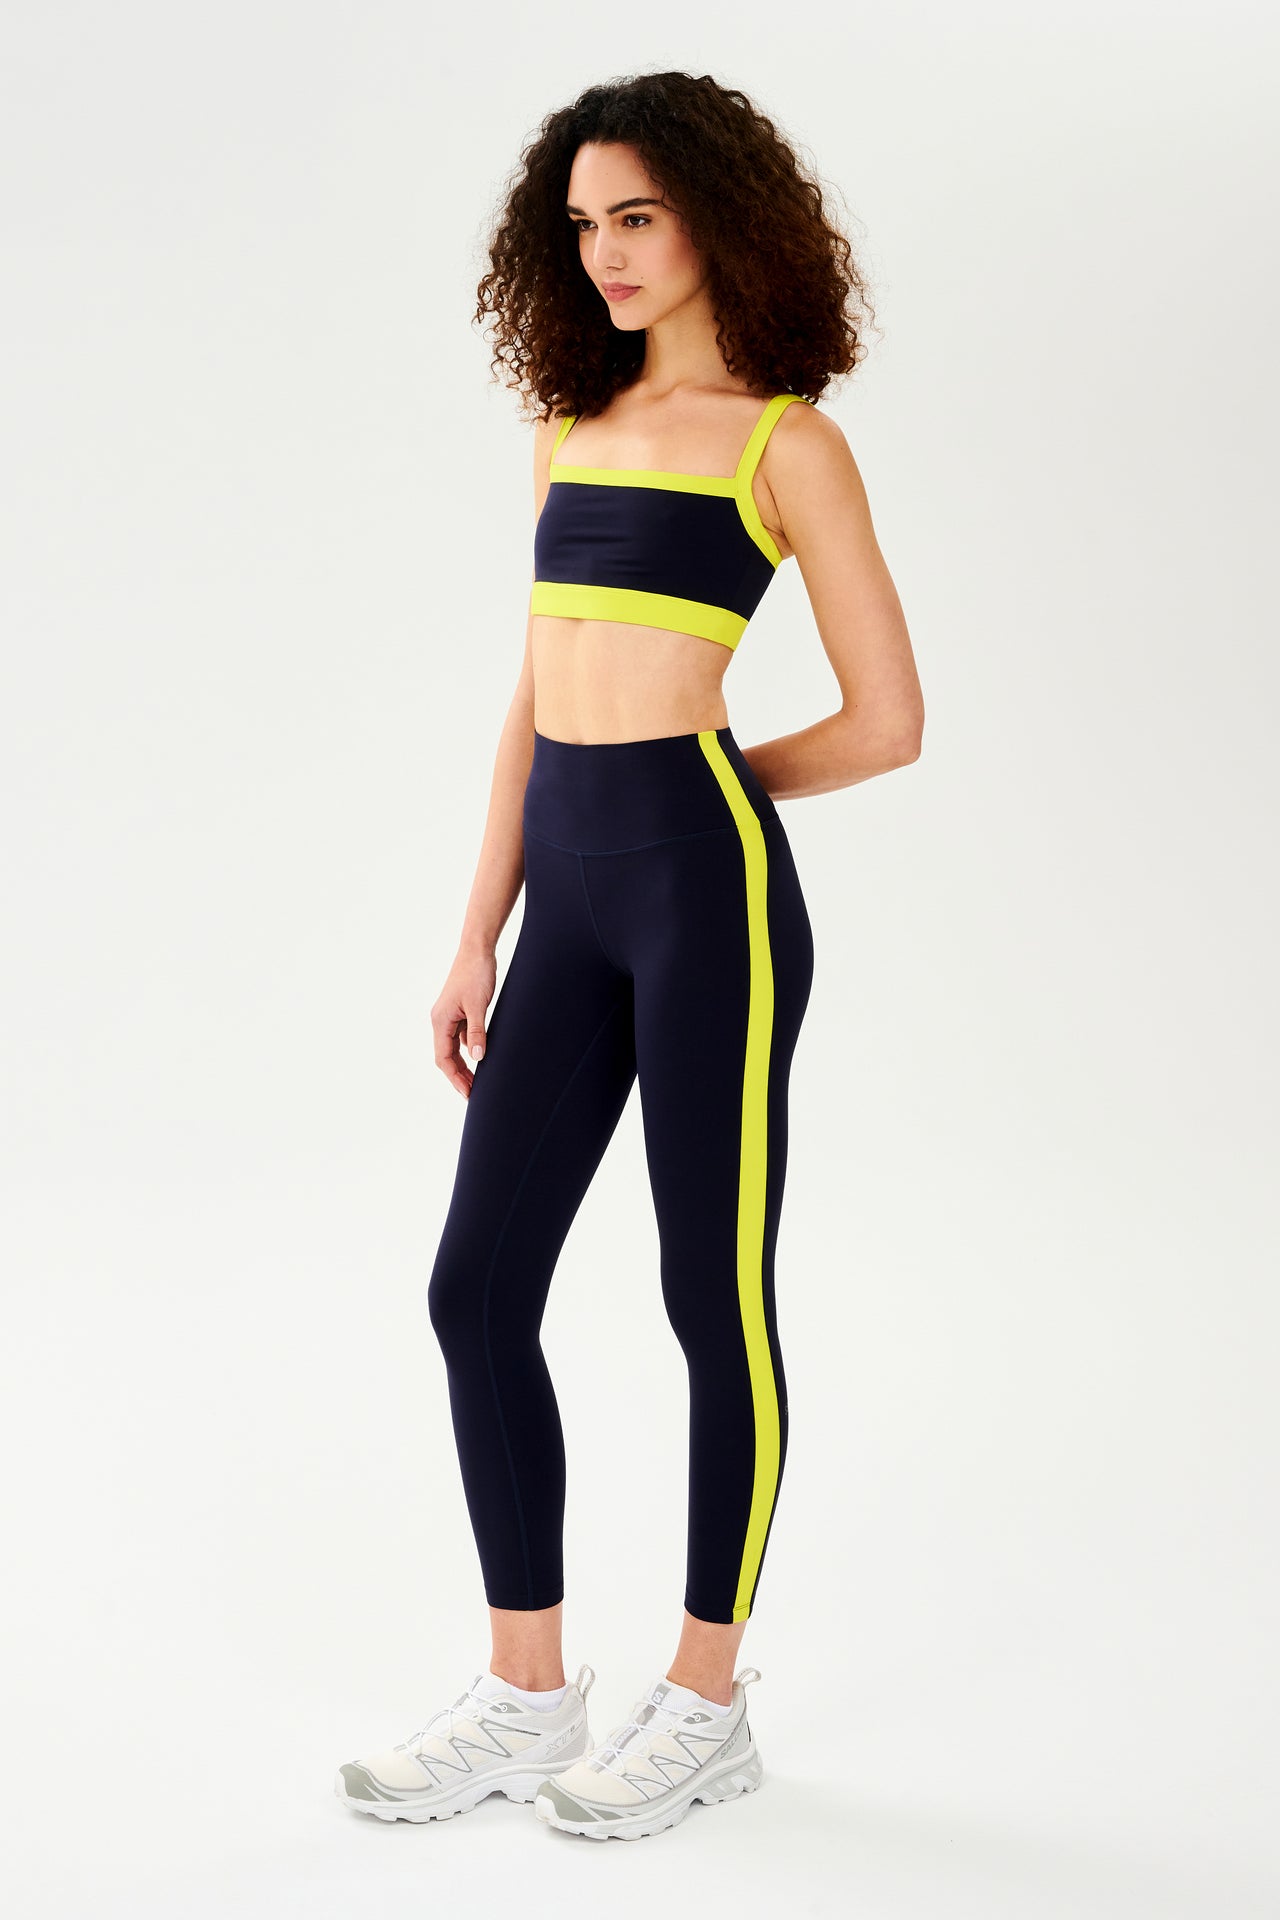 A woman wearing a Monah Rigor Bra in Indigo/Chartreuse and leggings designed for workout comfort and support by SPLITS59.